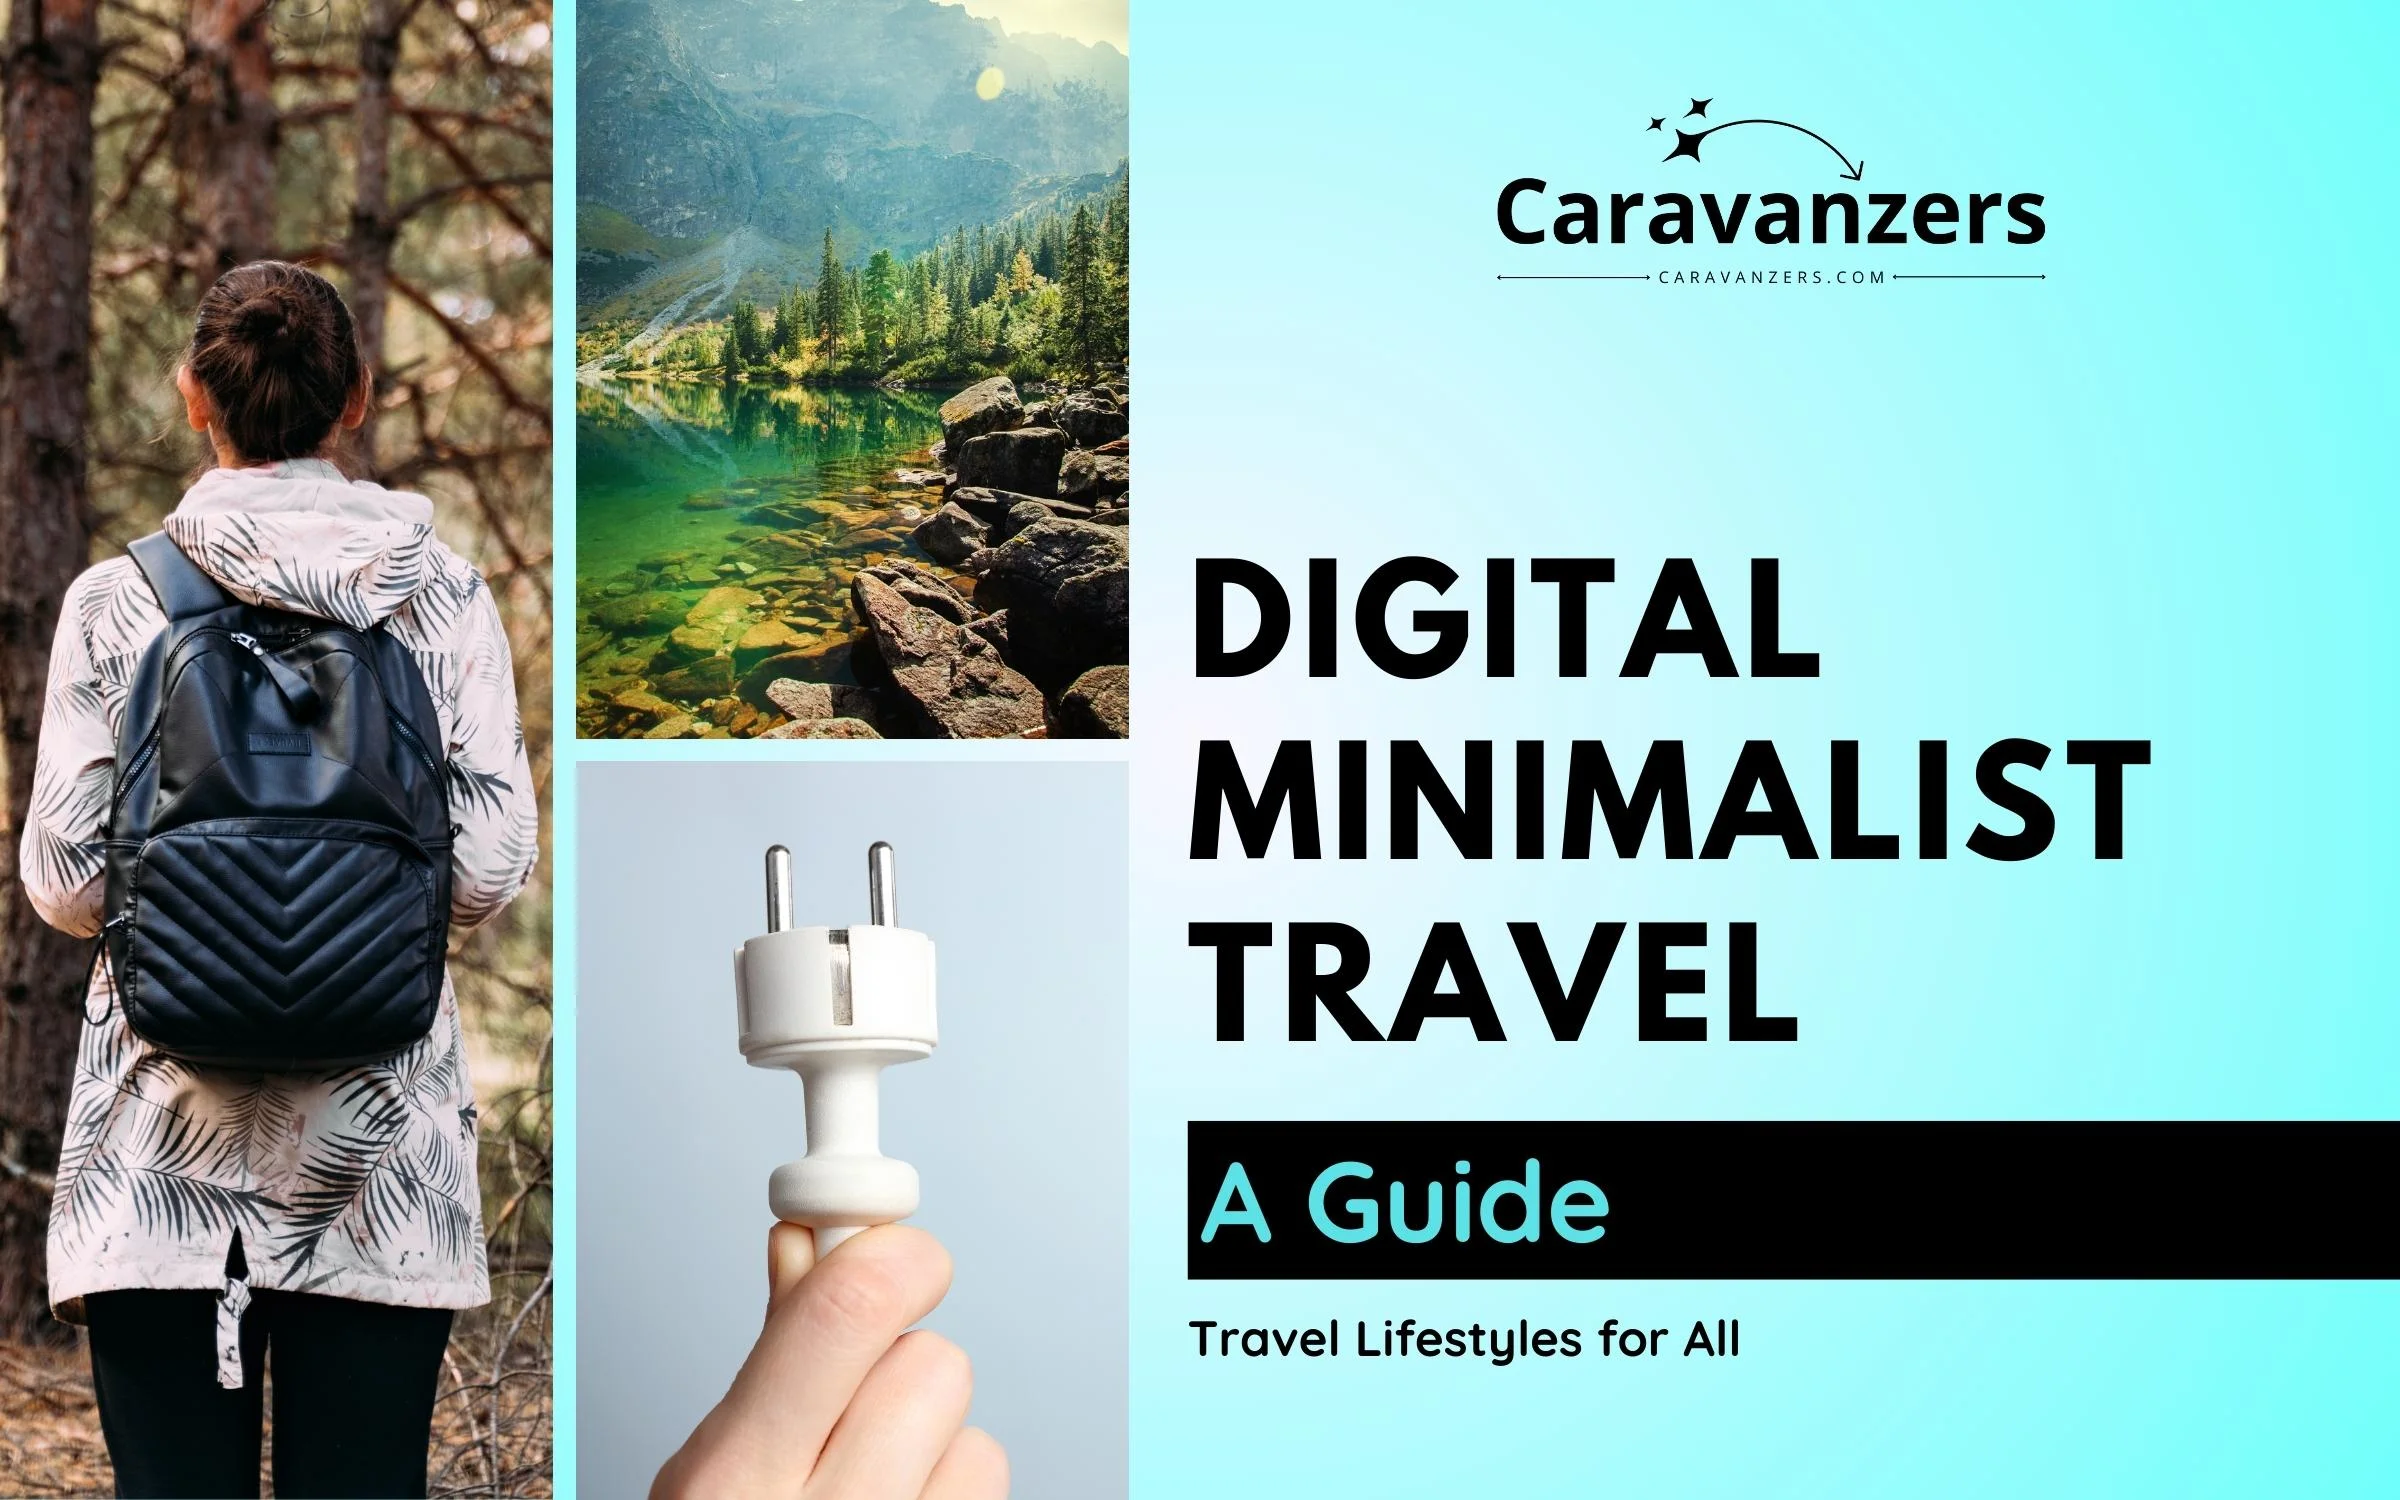 Digital Minimalist Travel Ideas to Make Your Own for Your Next Trip - Caravanzers